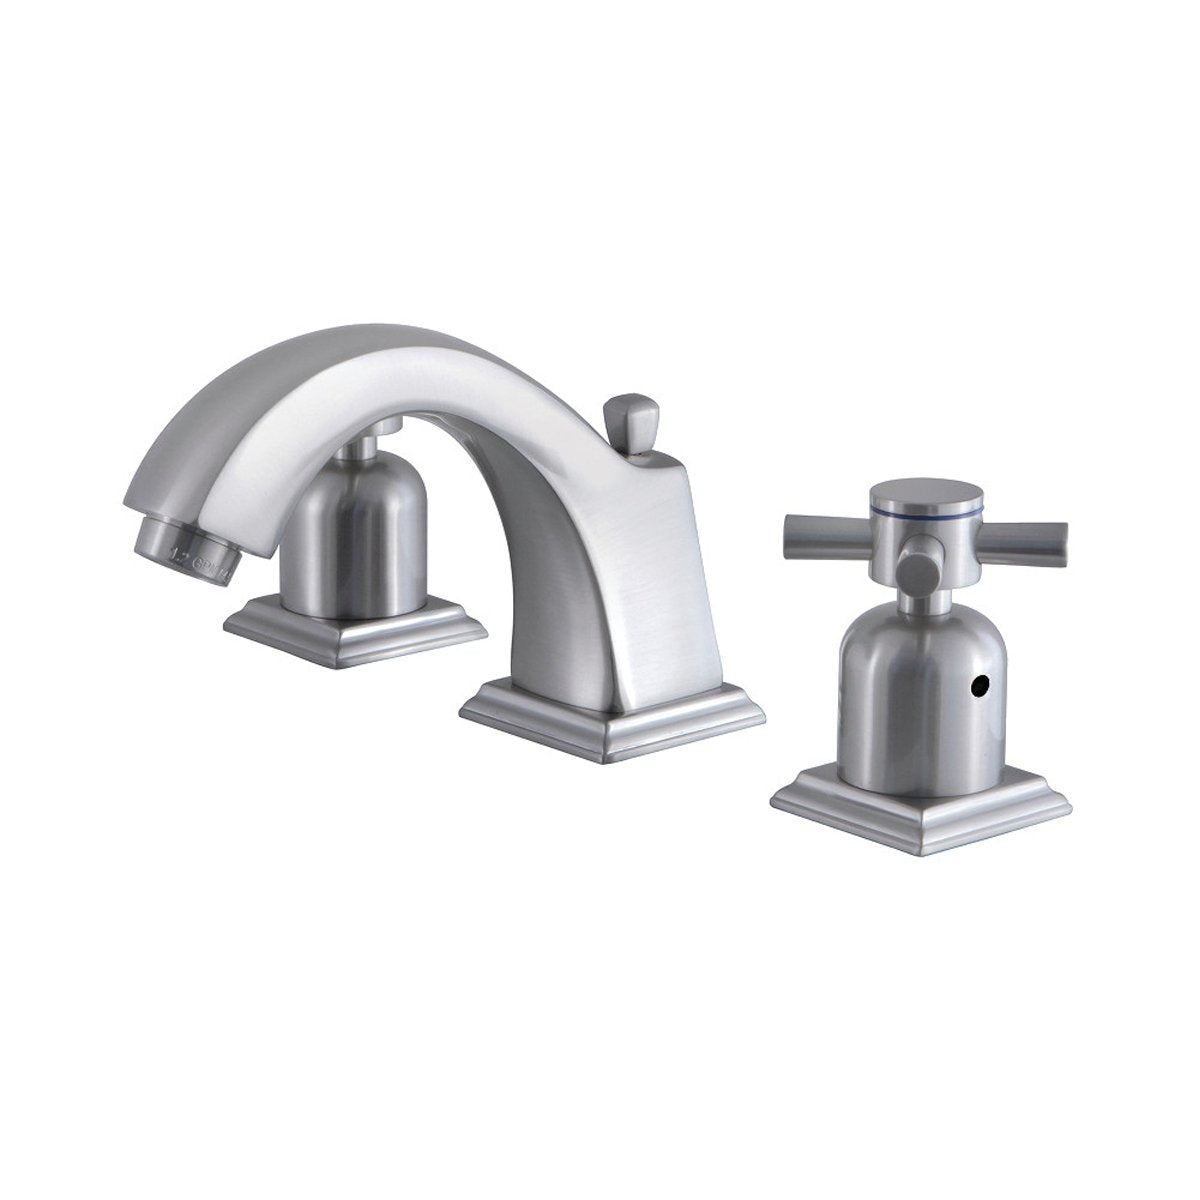 Kingston Brass Concord Fauceture FSC4688DX 8-Inch Widespread Bathroom Faucet in Brushed Nickel